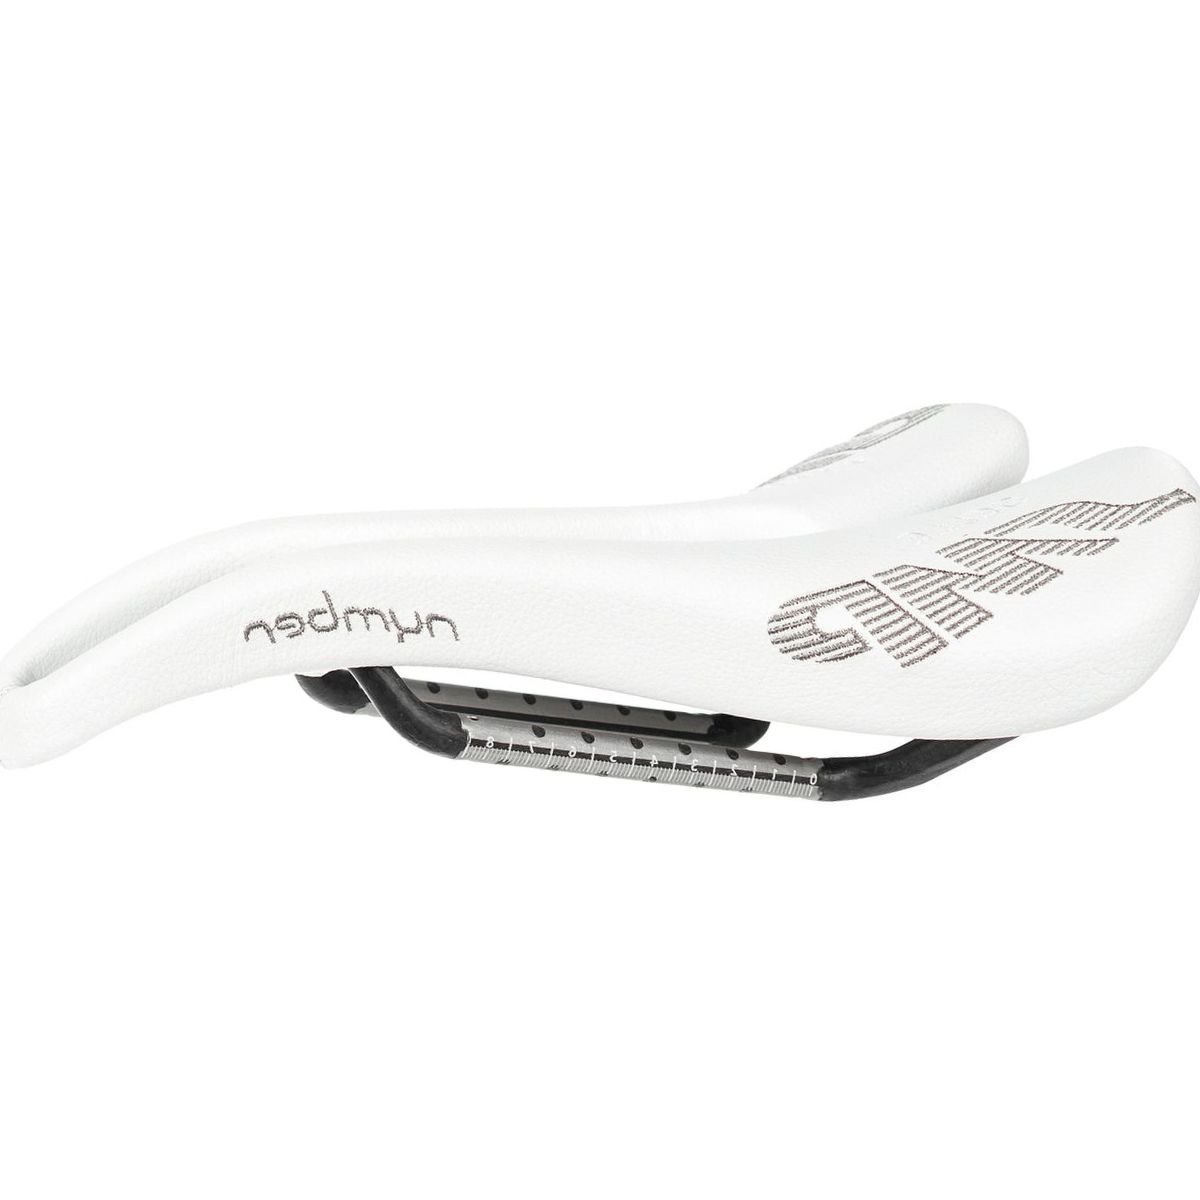 Selle SMP Nymber Carbon Saddle - Men's